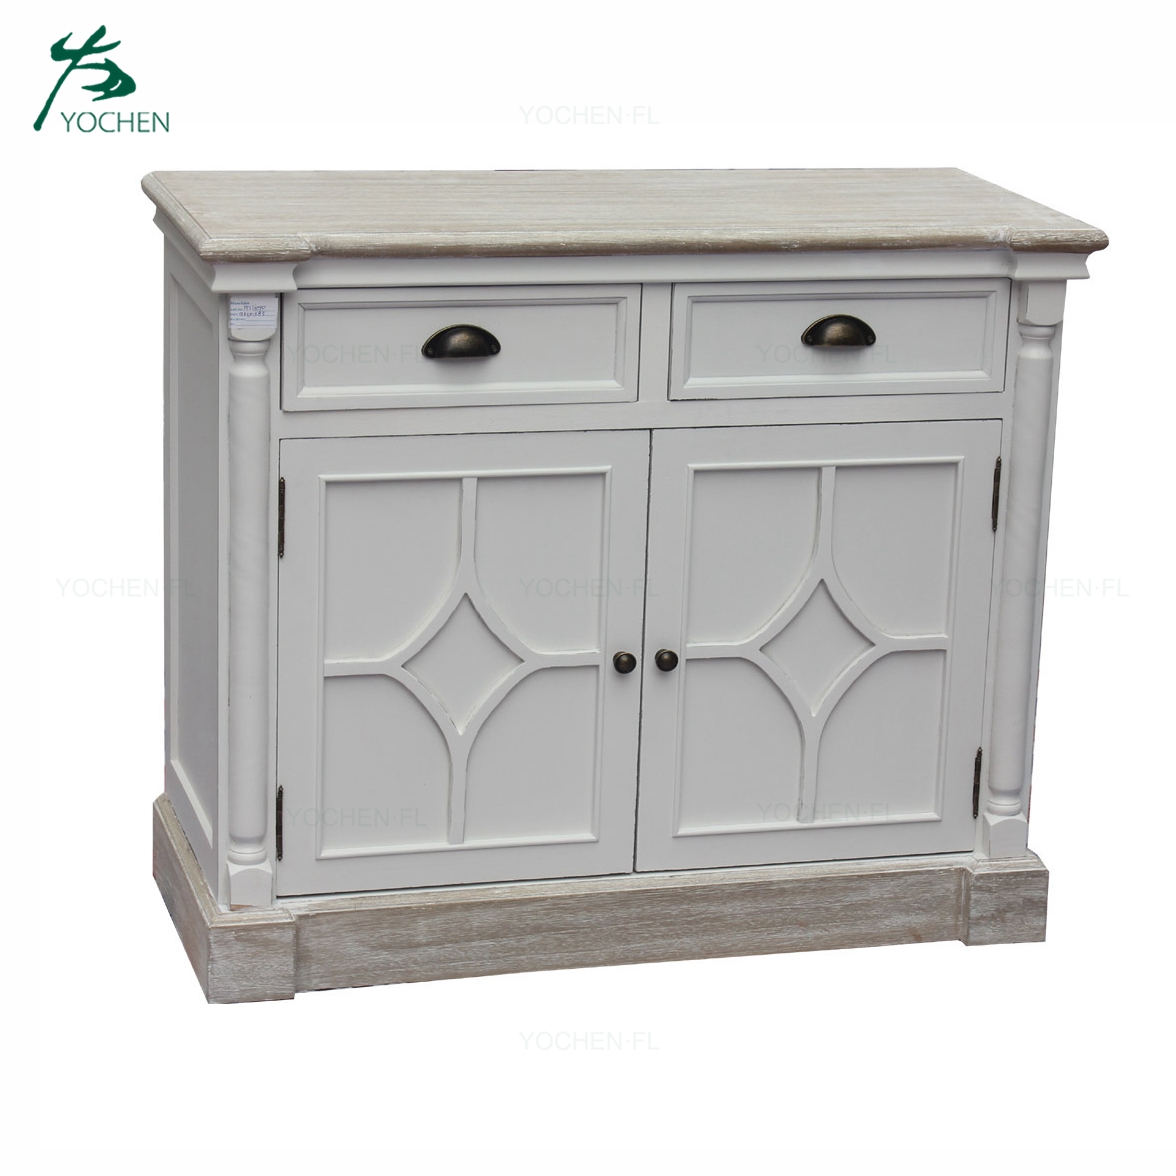 Home Decor Furniture noble white vintage cabinet with drawers